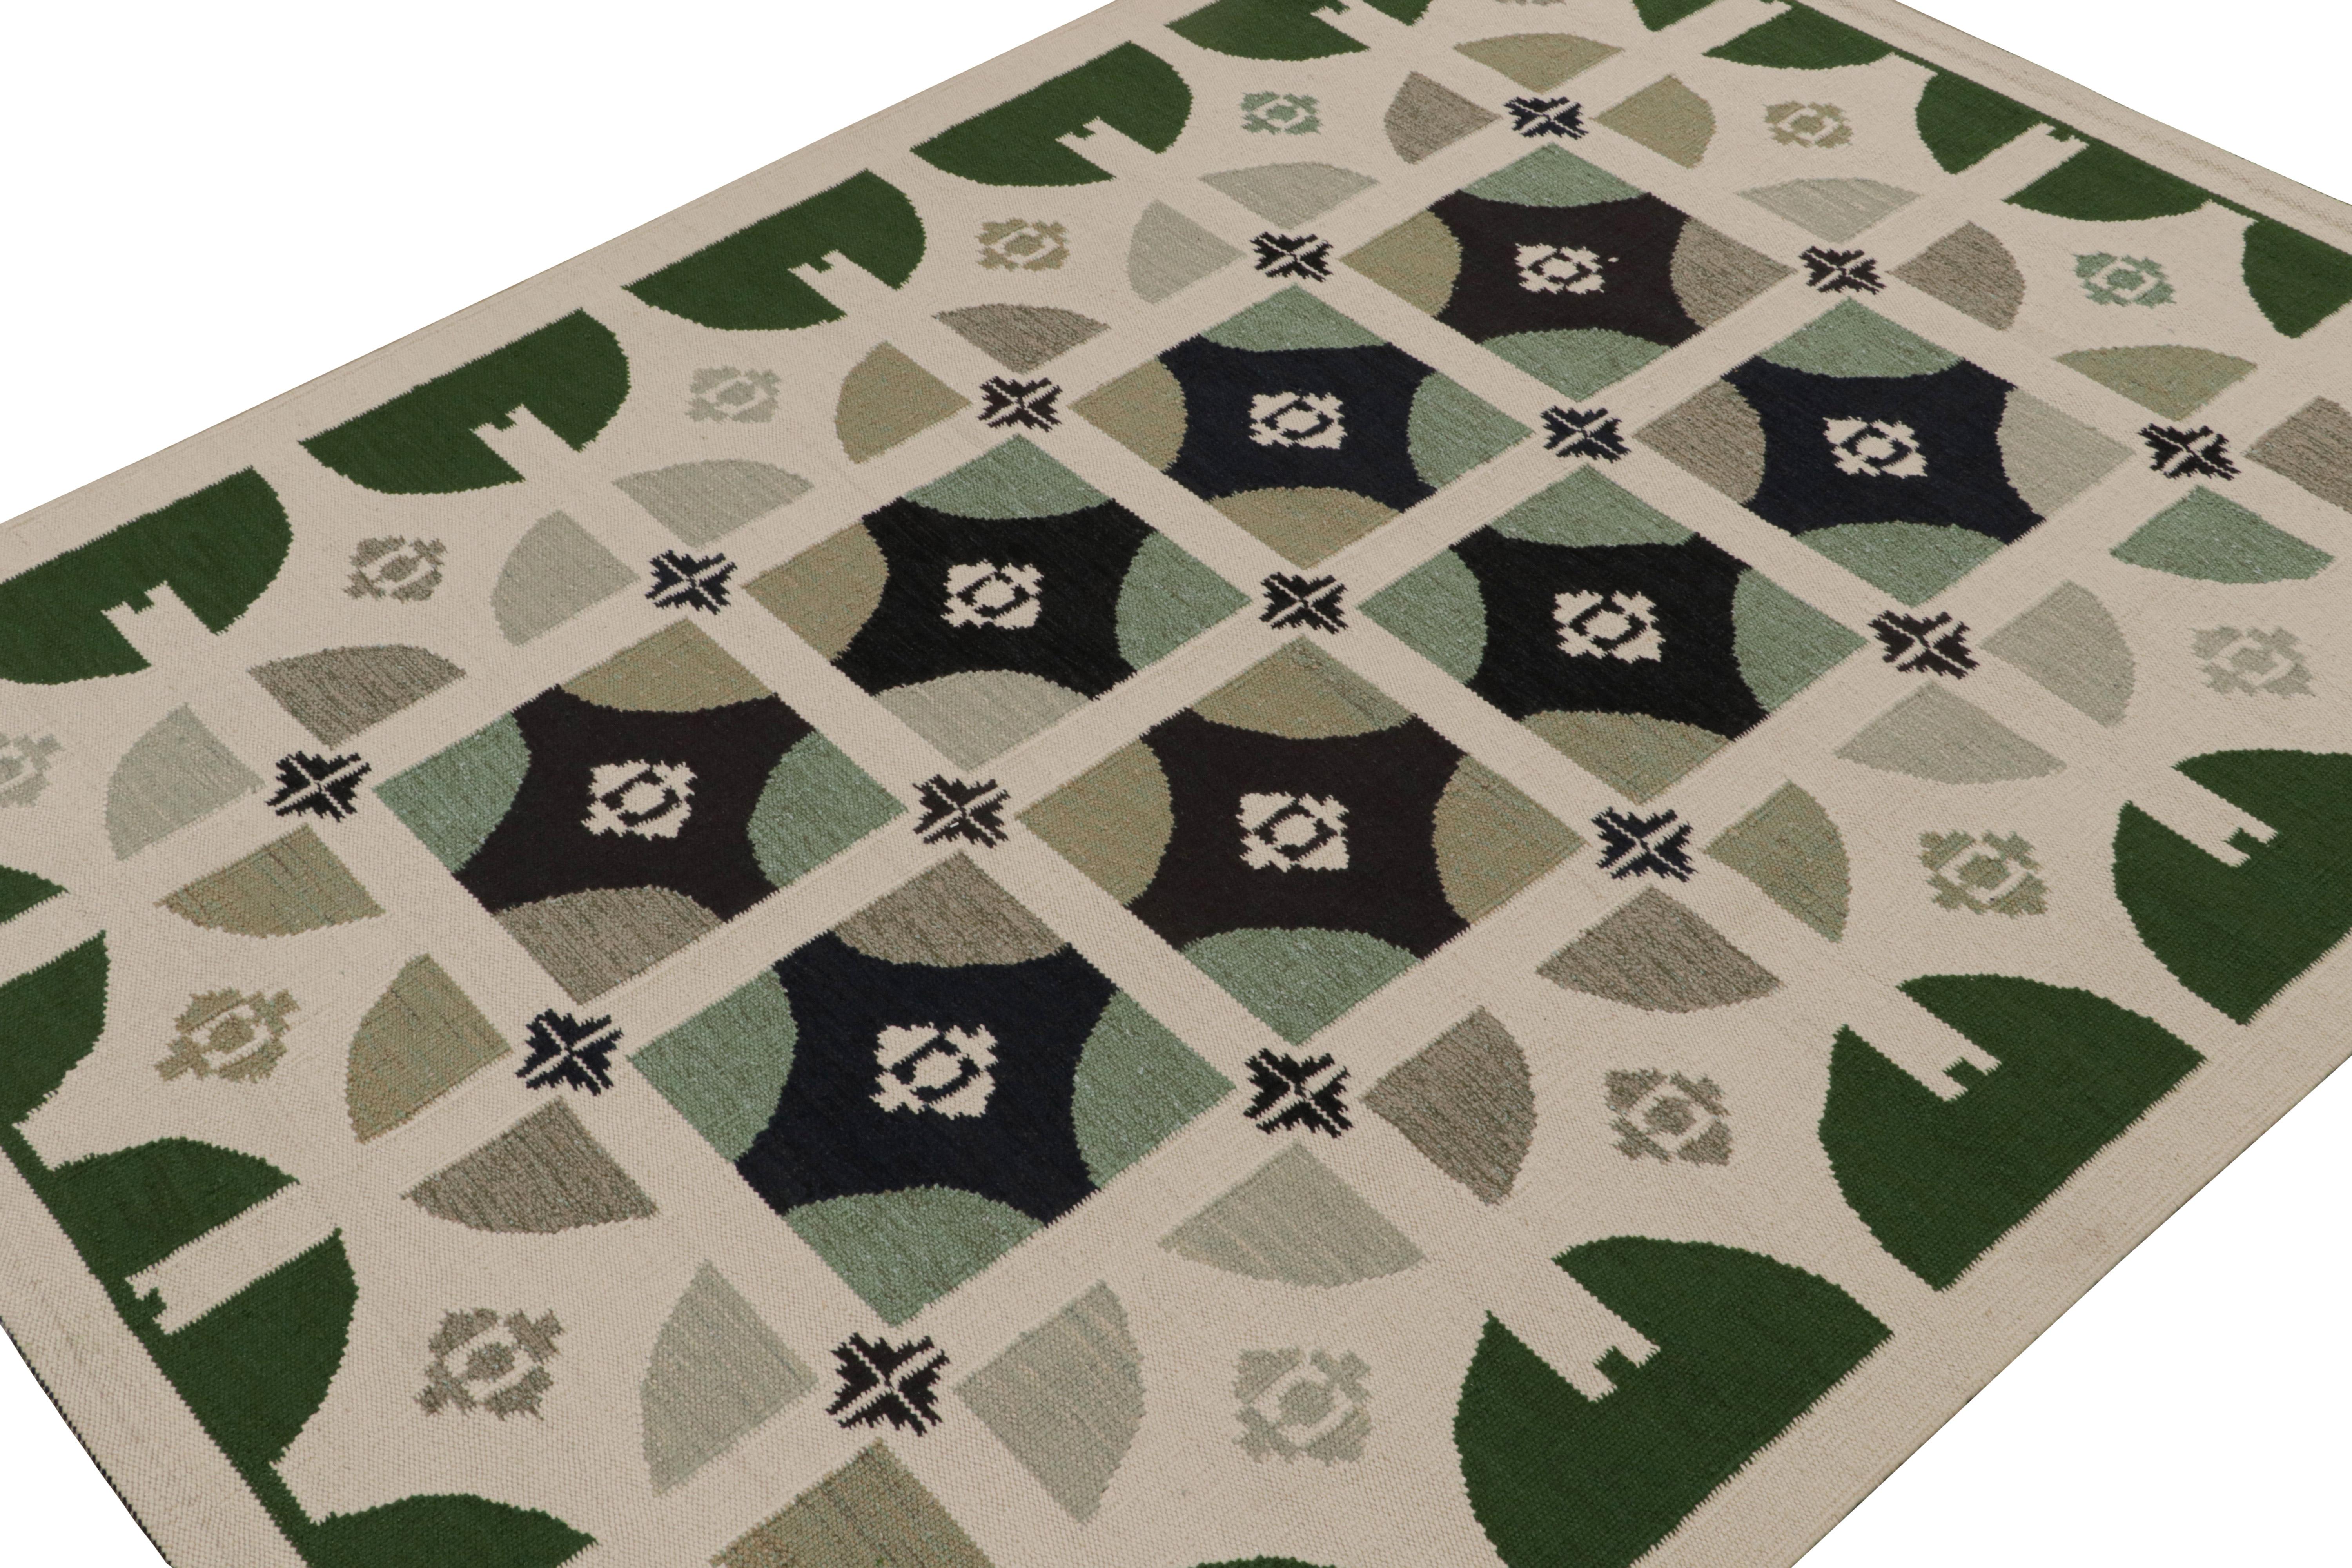 A 9x12 Swedish style custom kilim from our award-winning Scandinavian flat weave collection. Handwoven in wool, cotton & undyed natural yarns

On the Design: 

This rug enjoys geometric patterns in green, white & black. Keen eyes will admire undyed,